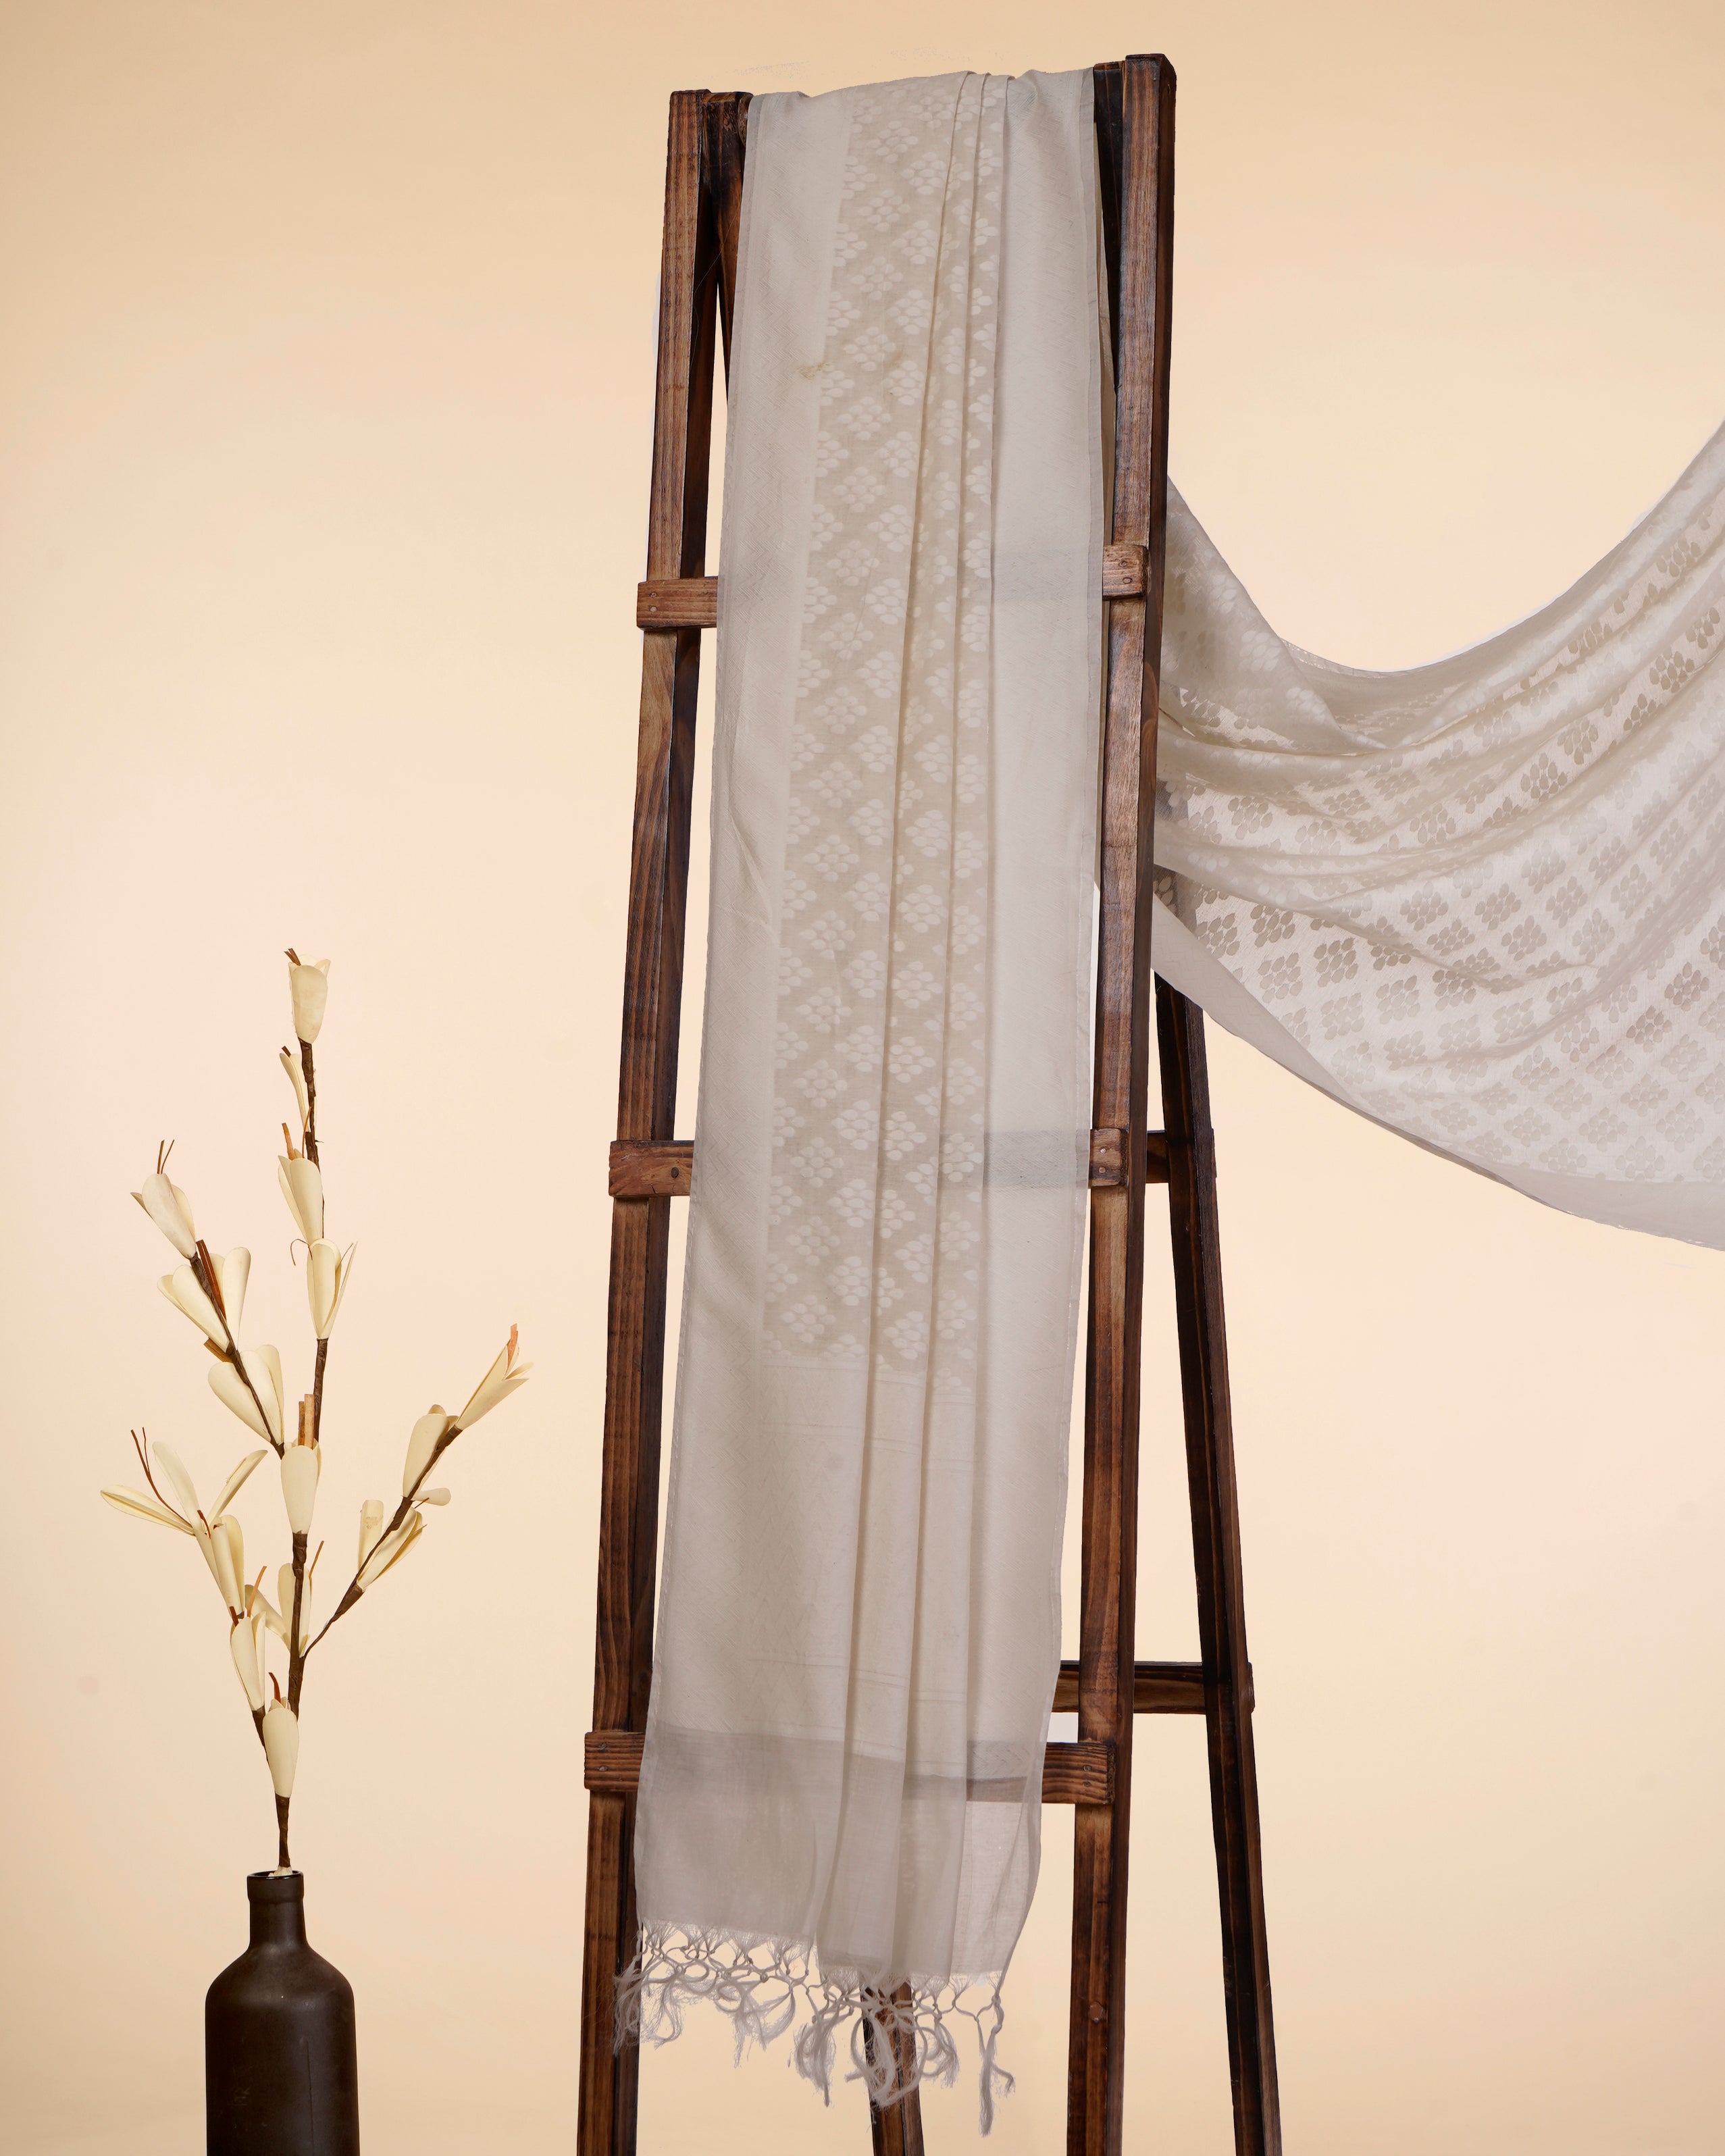 Off White Color Handwoven Jacquard Cotton Silk Dupatta with Tassels